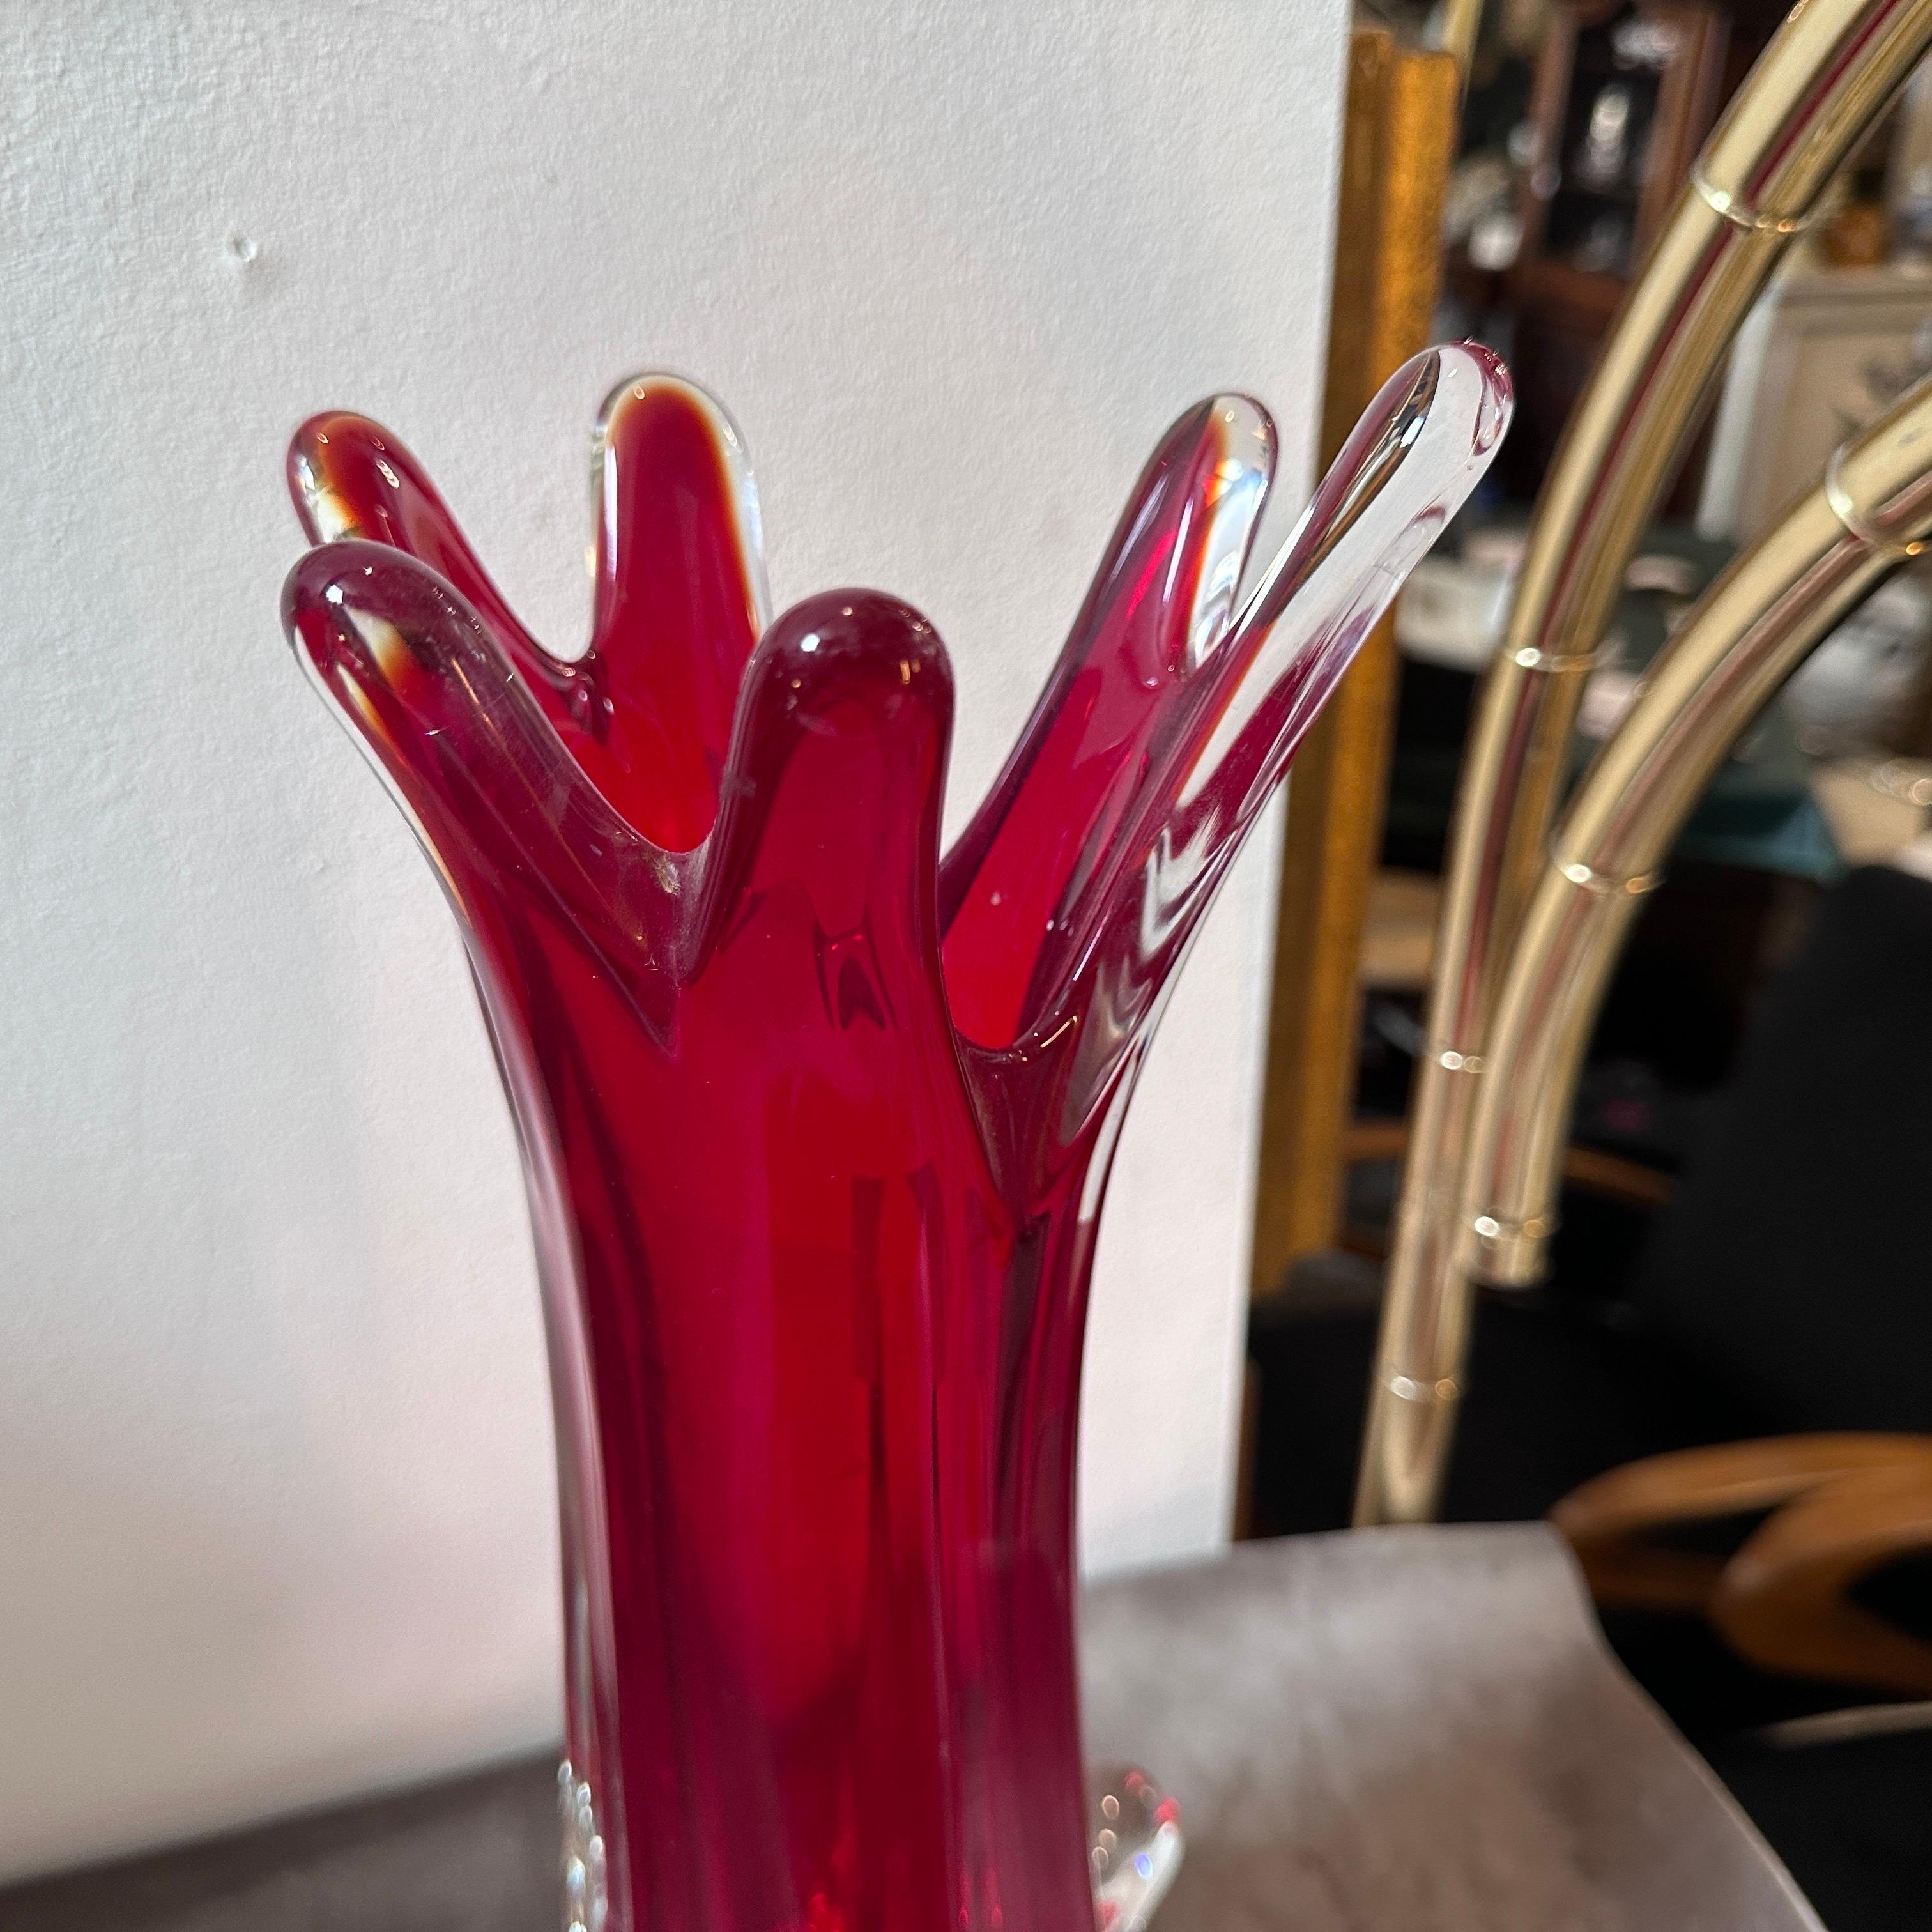 1980s Modernist Red Sommerso Murano Glass Tall Vase by Seguso For Sale 1